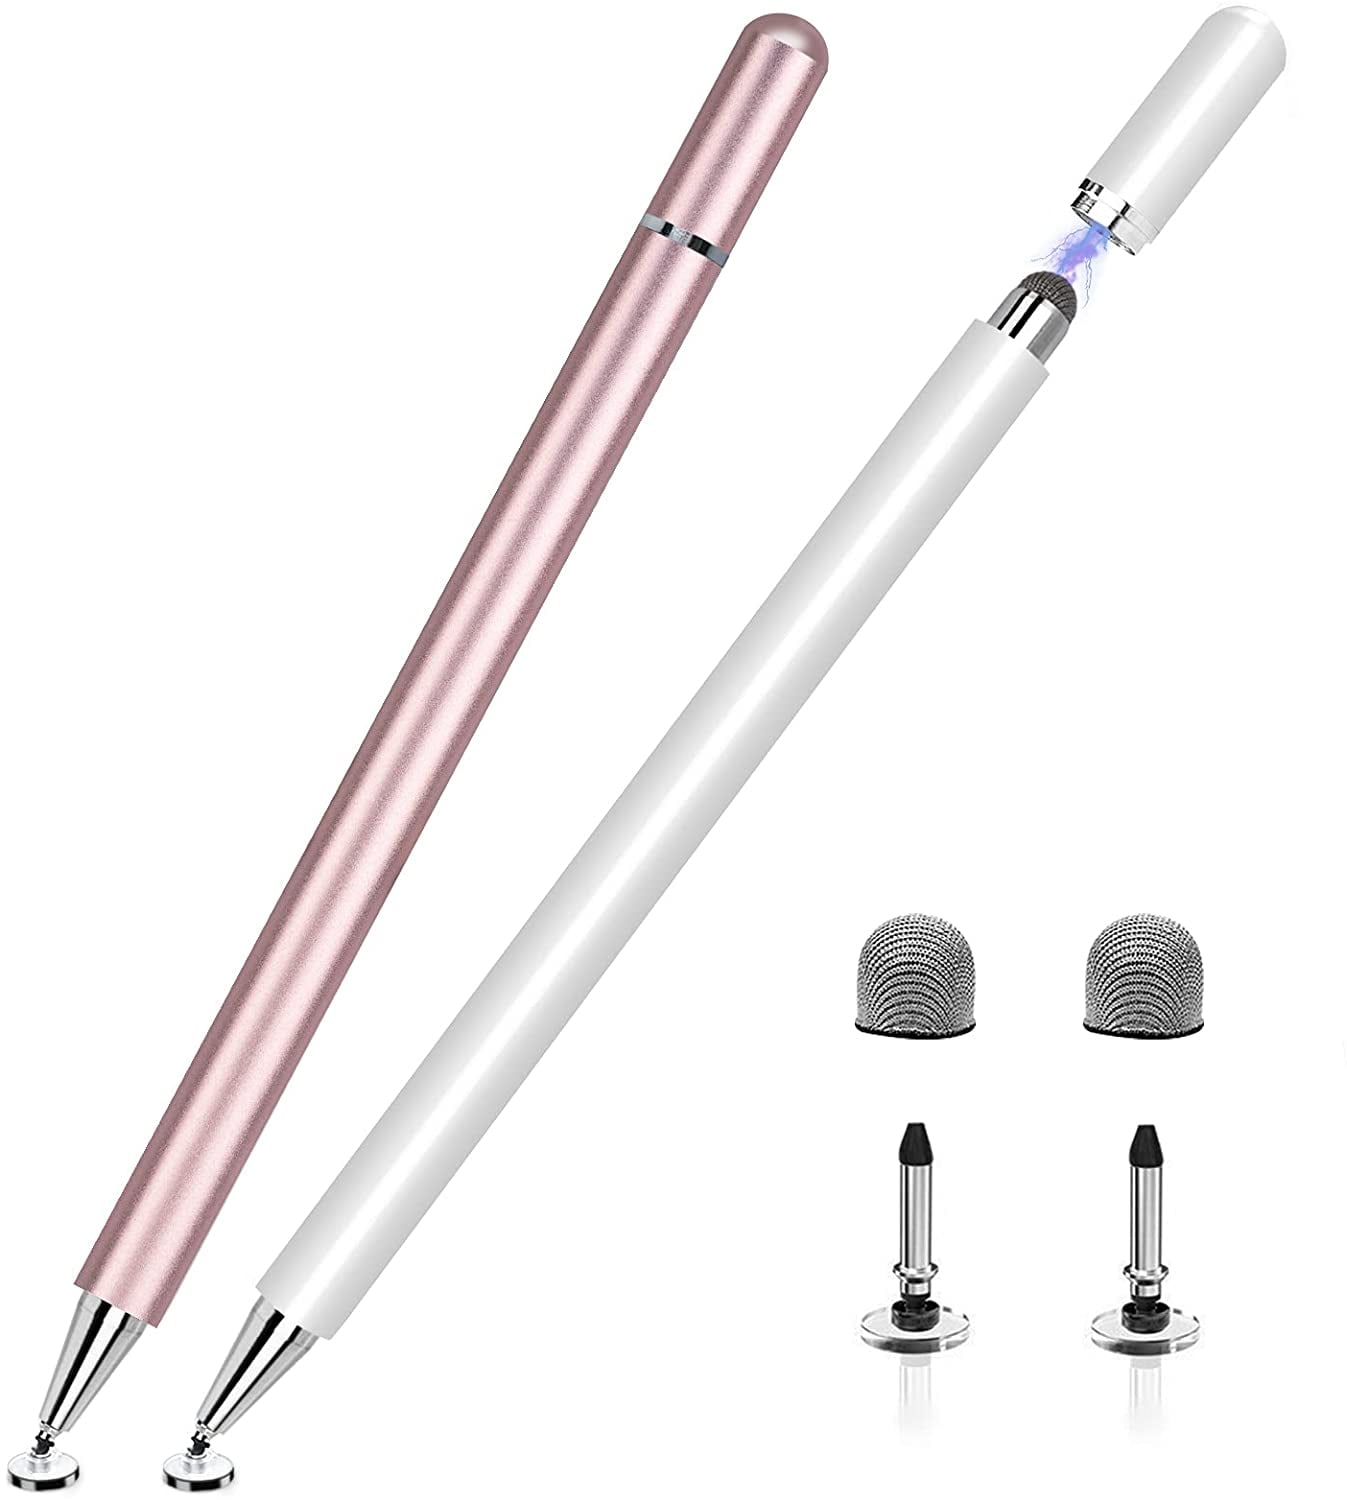 2 Pcs Universal Stylus Pencil with Magnetic Cap Compatible with All Touch Screens Stylus Pen for iPad 